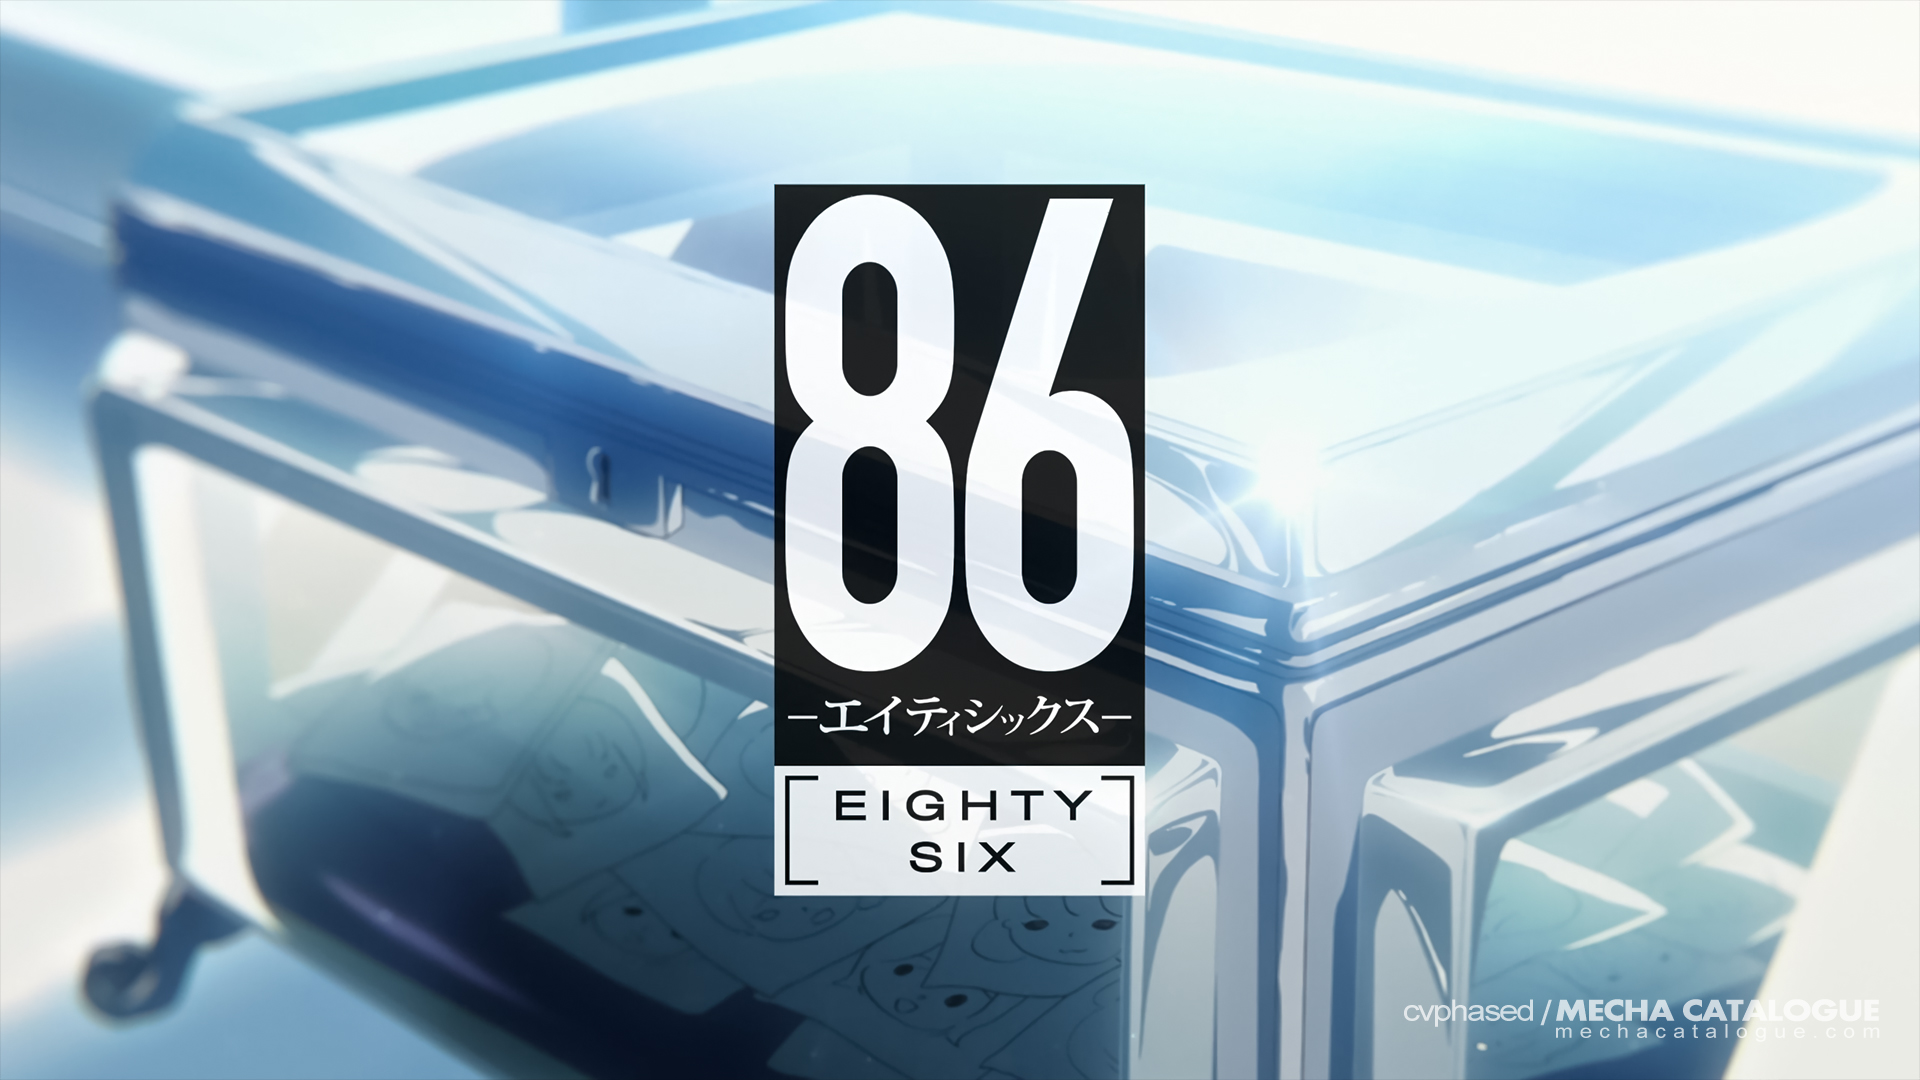 Produced With Passion: “86 -Eighty Six-” Series Review – cvphased